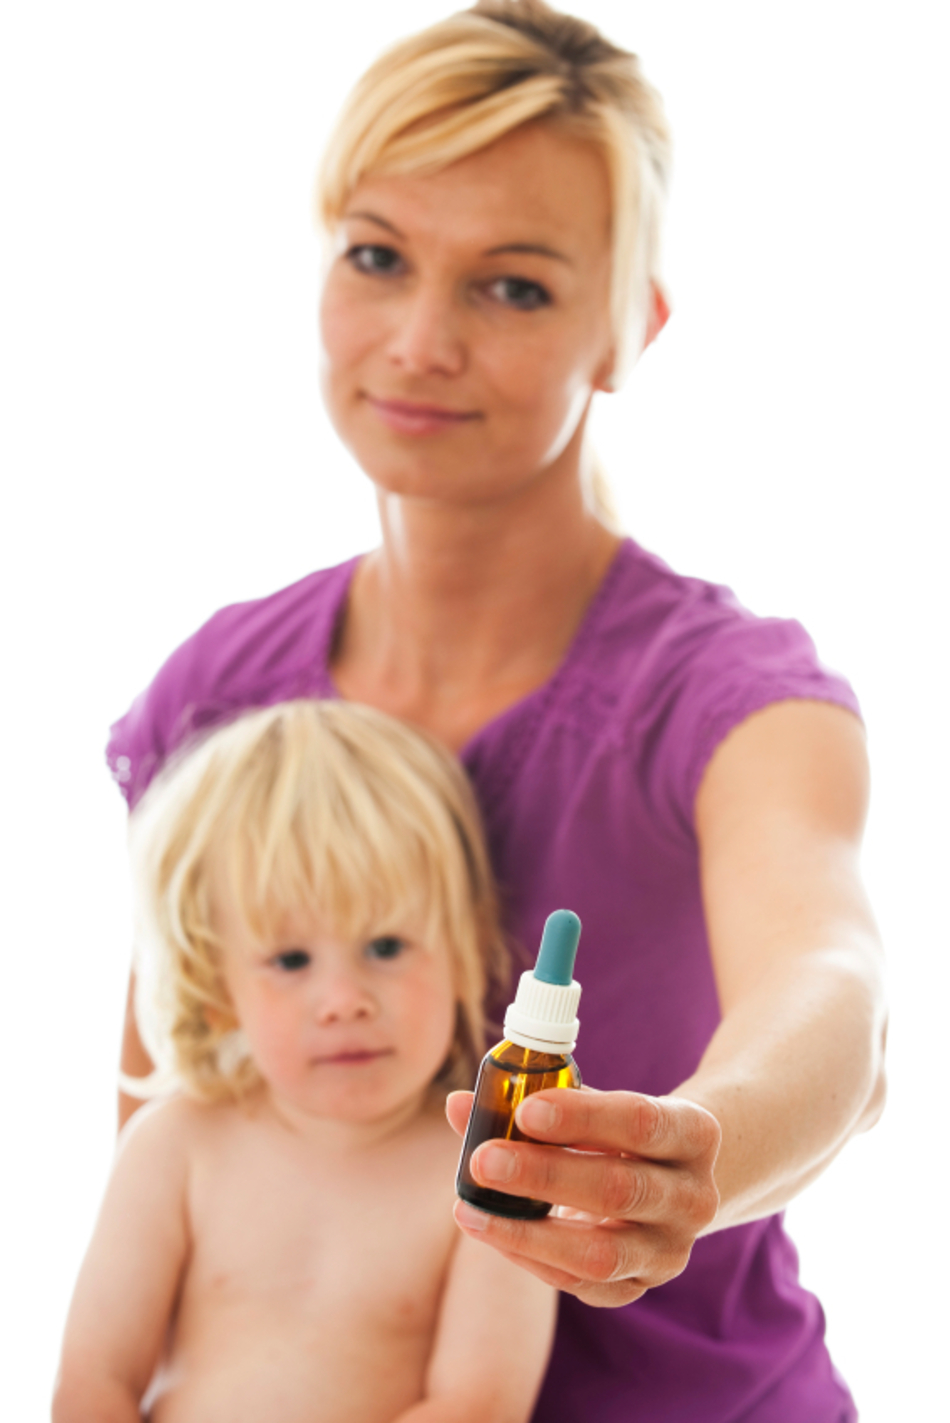 Is Complementary and Alternative Medicine a Good Idea for Kids?